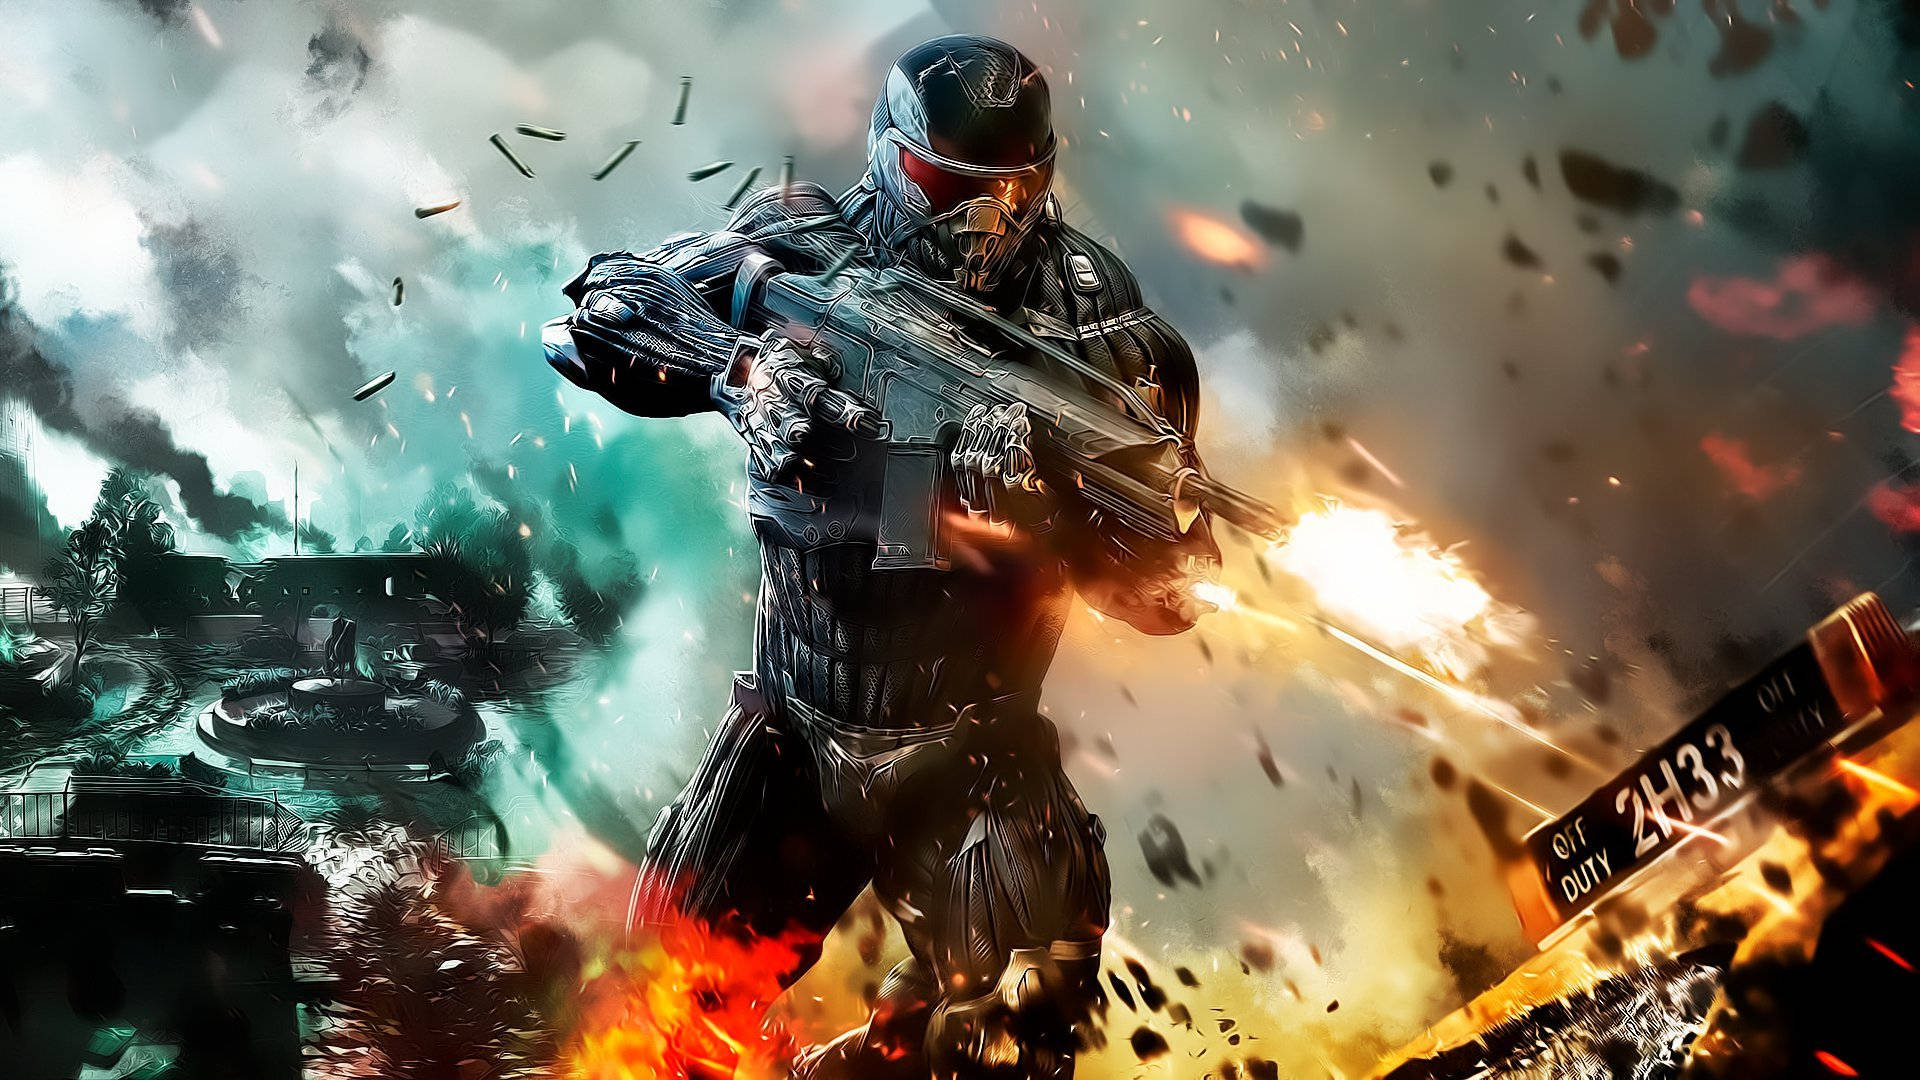 Crysis 2 Shooter Video Game Background